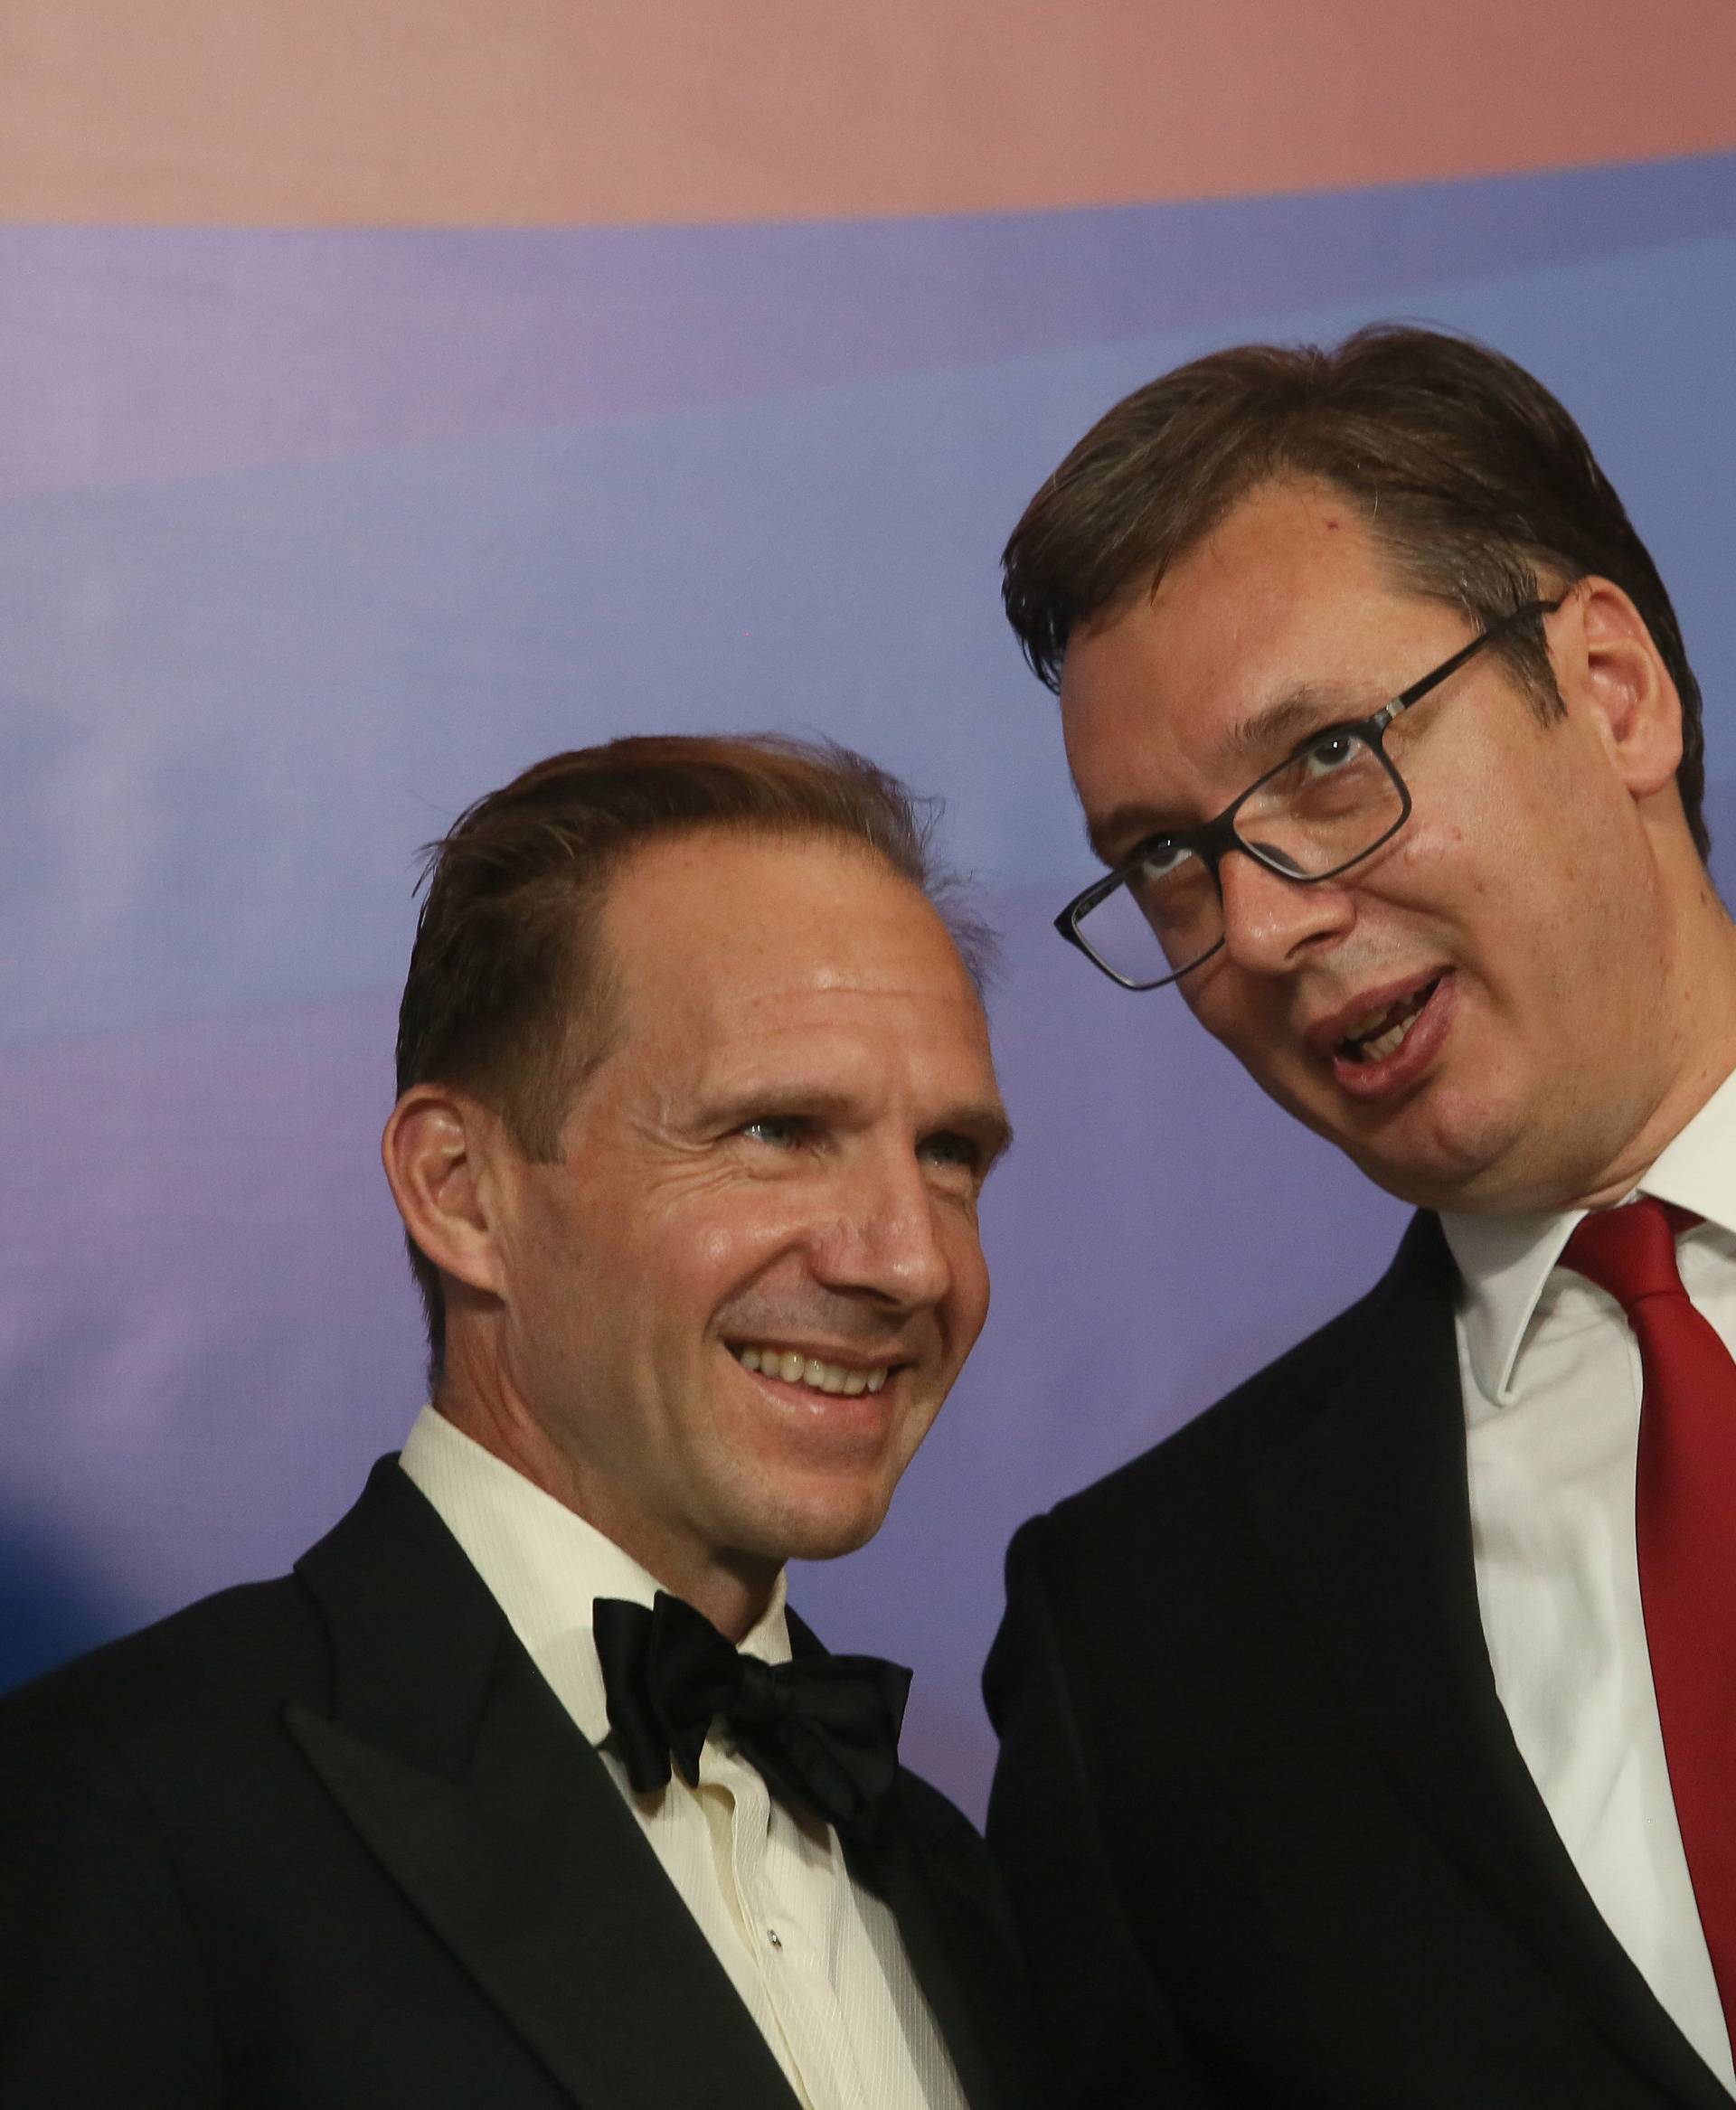 Serbia's President Aleksandar Vucic and actor Ralph Fiennes attend an inauguration ceremony in Belgrade